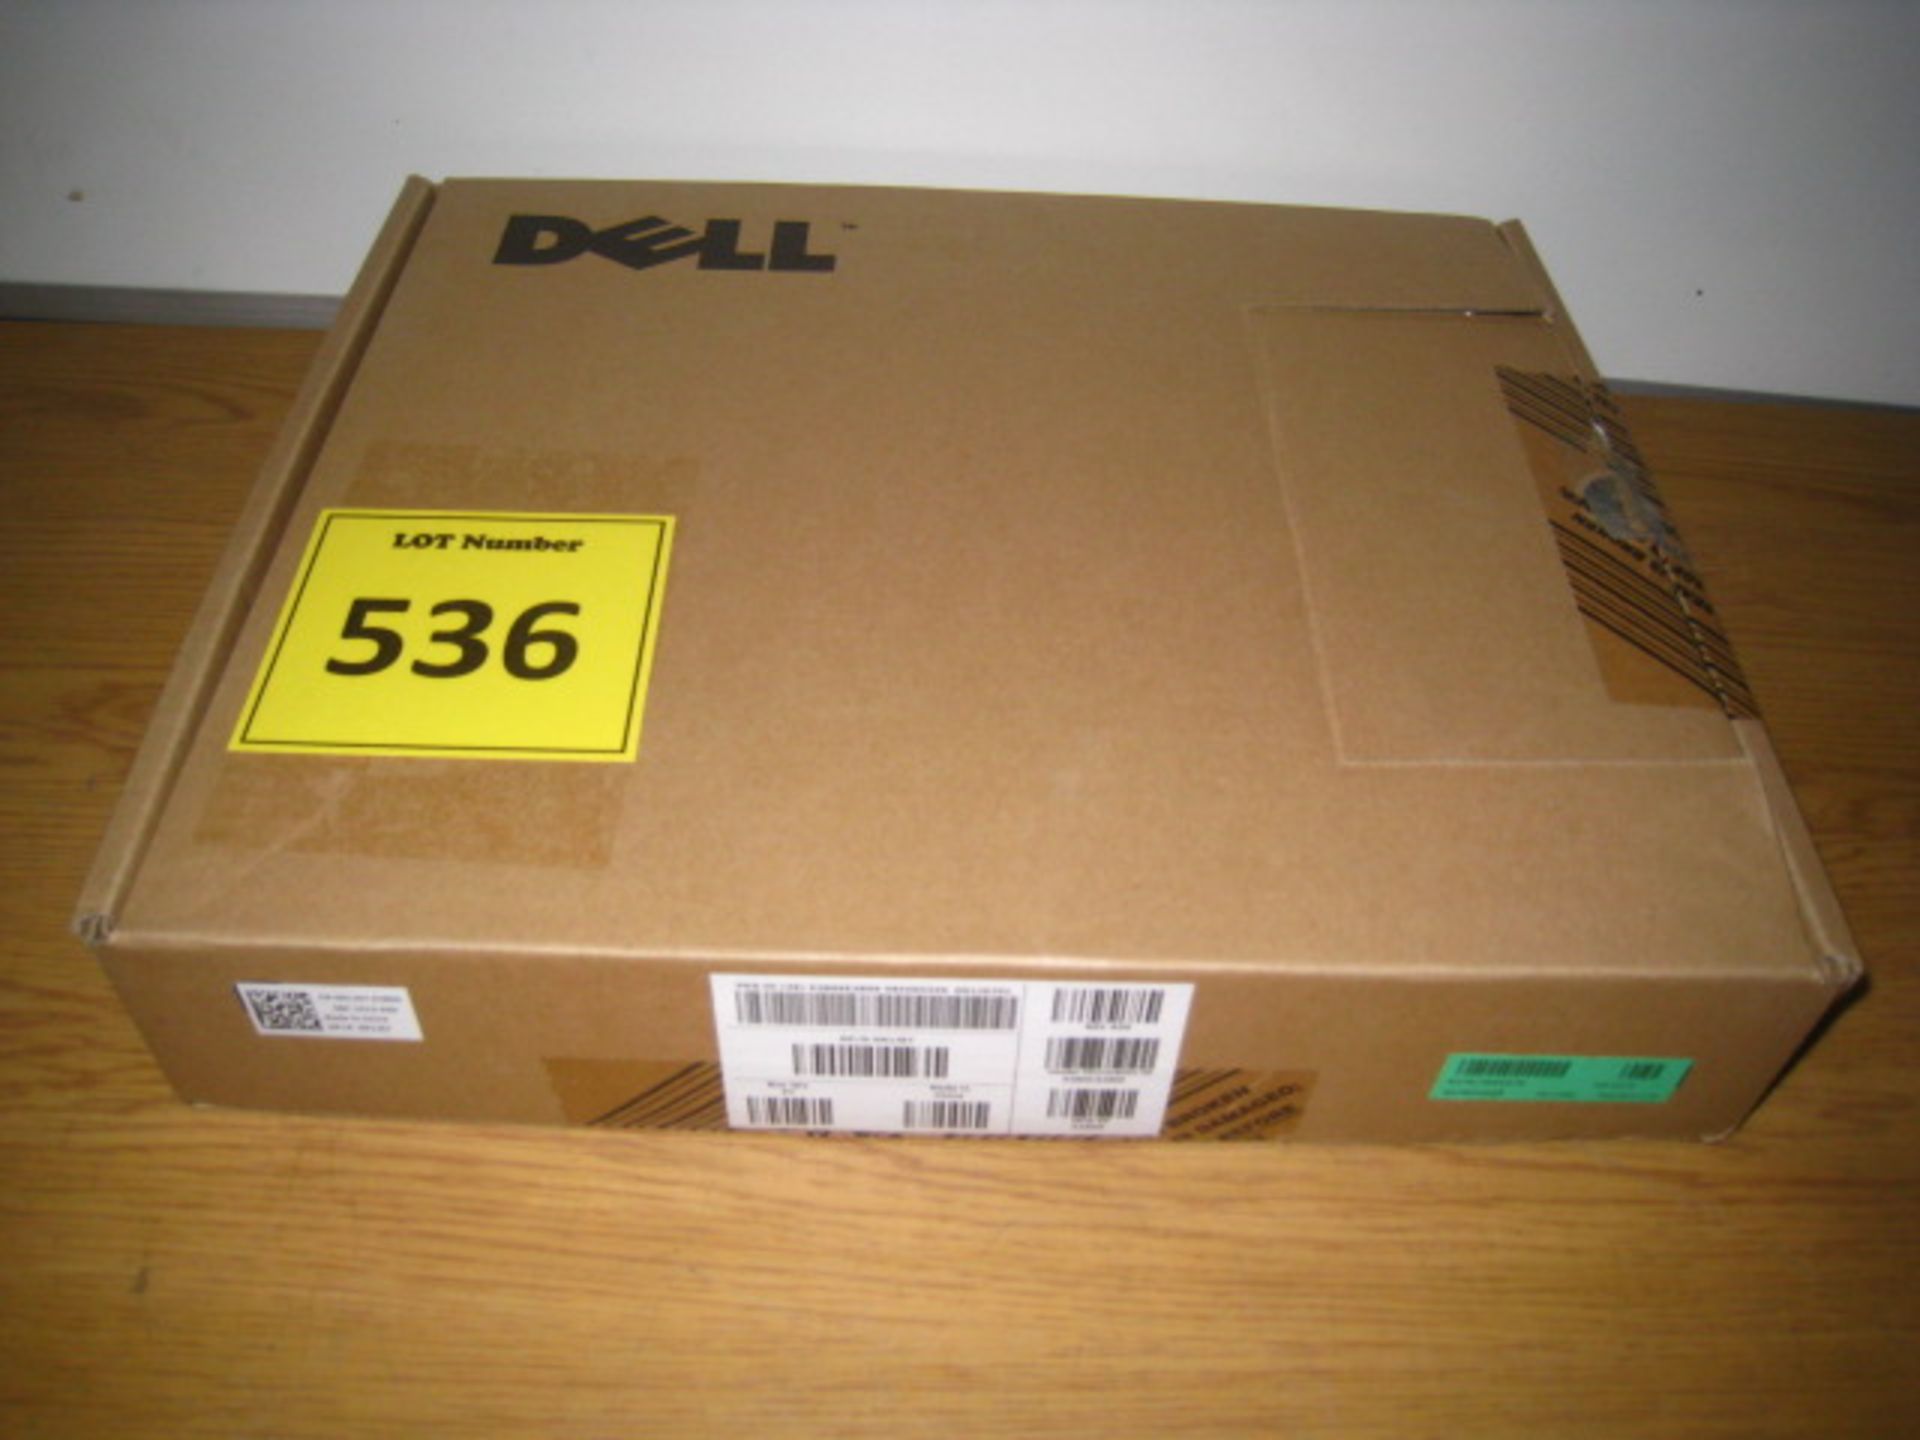 NEW & BOXED Dell Advanced USB 3.0 Laptop Docking Station Includes 130W Power Supply 0N1J67